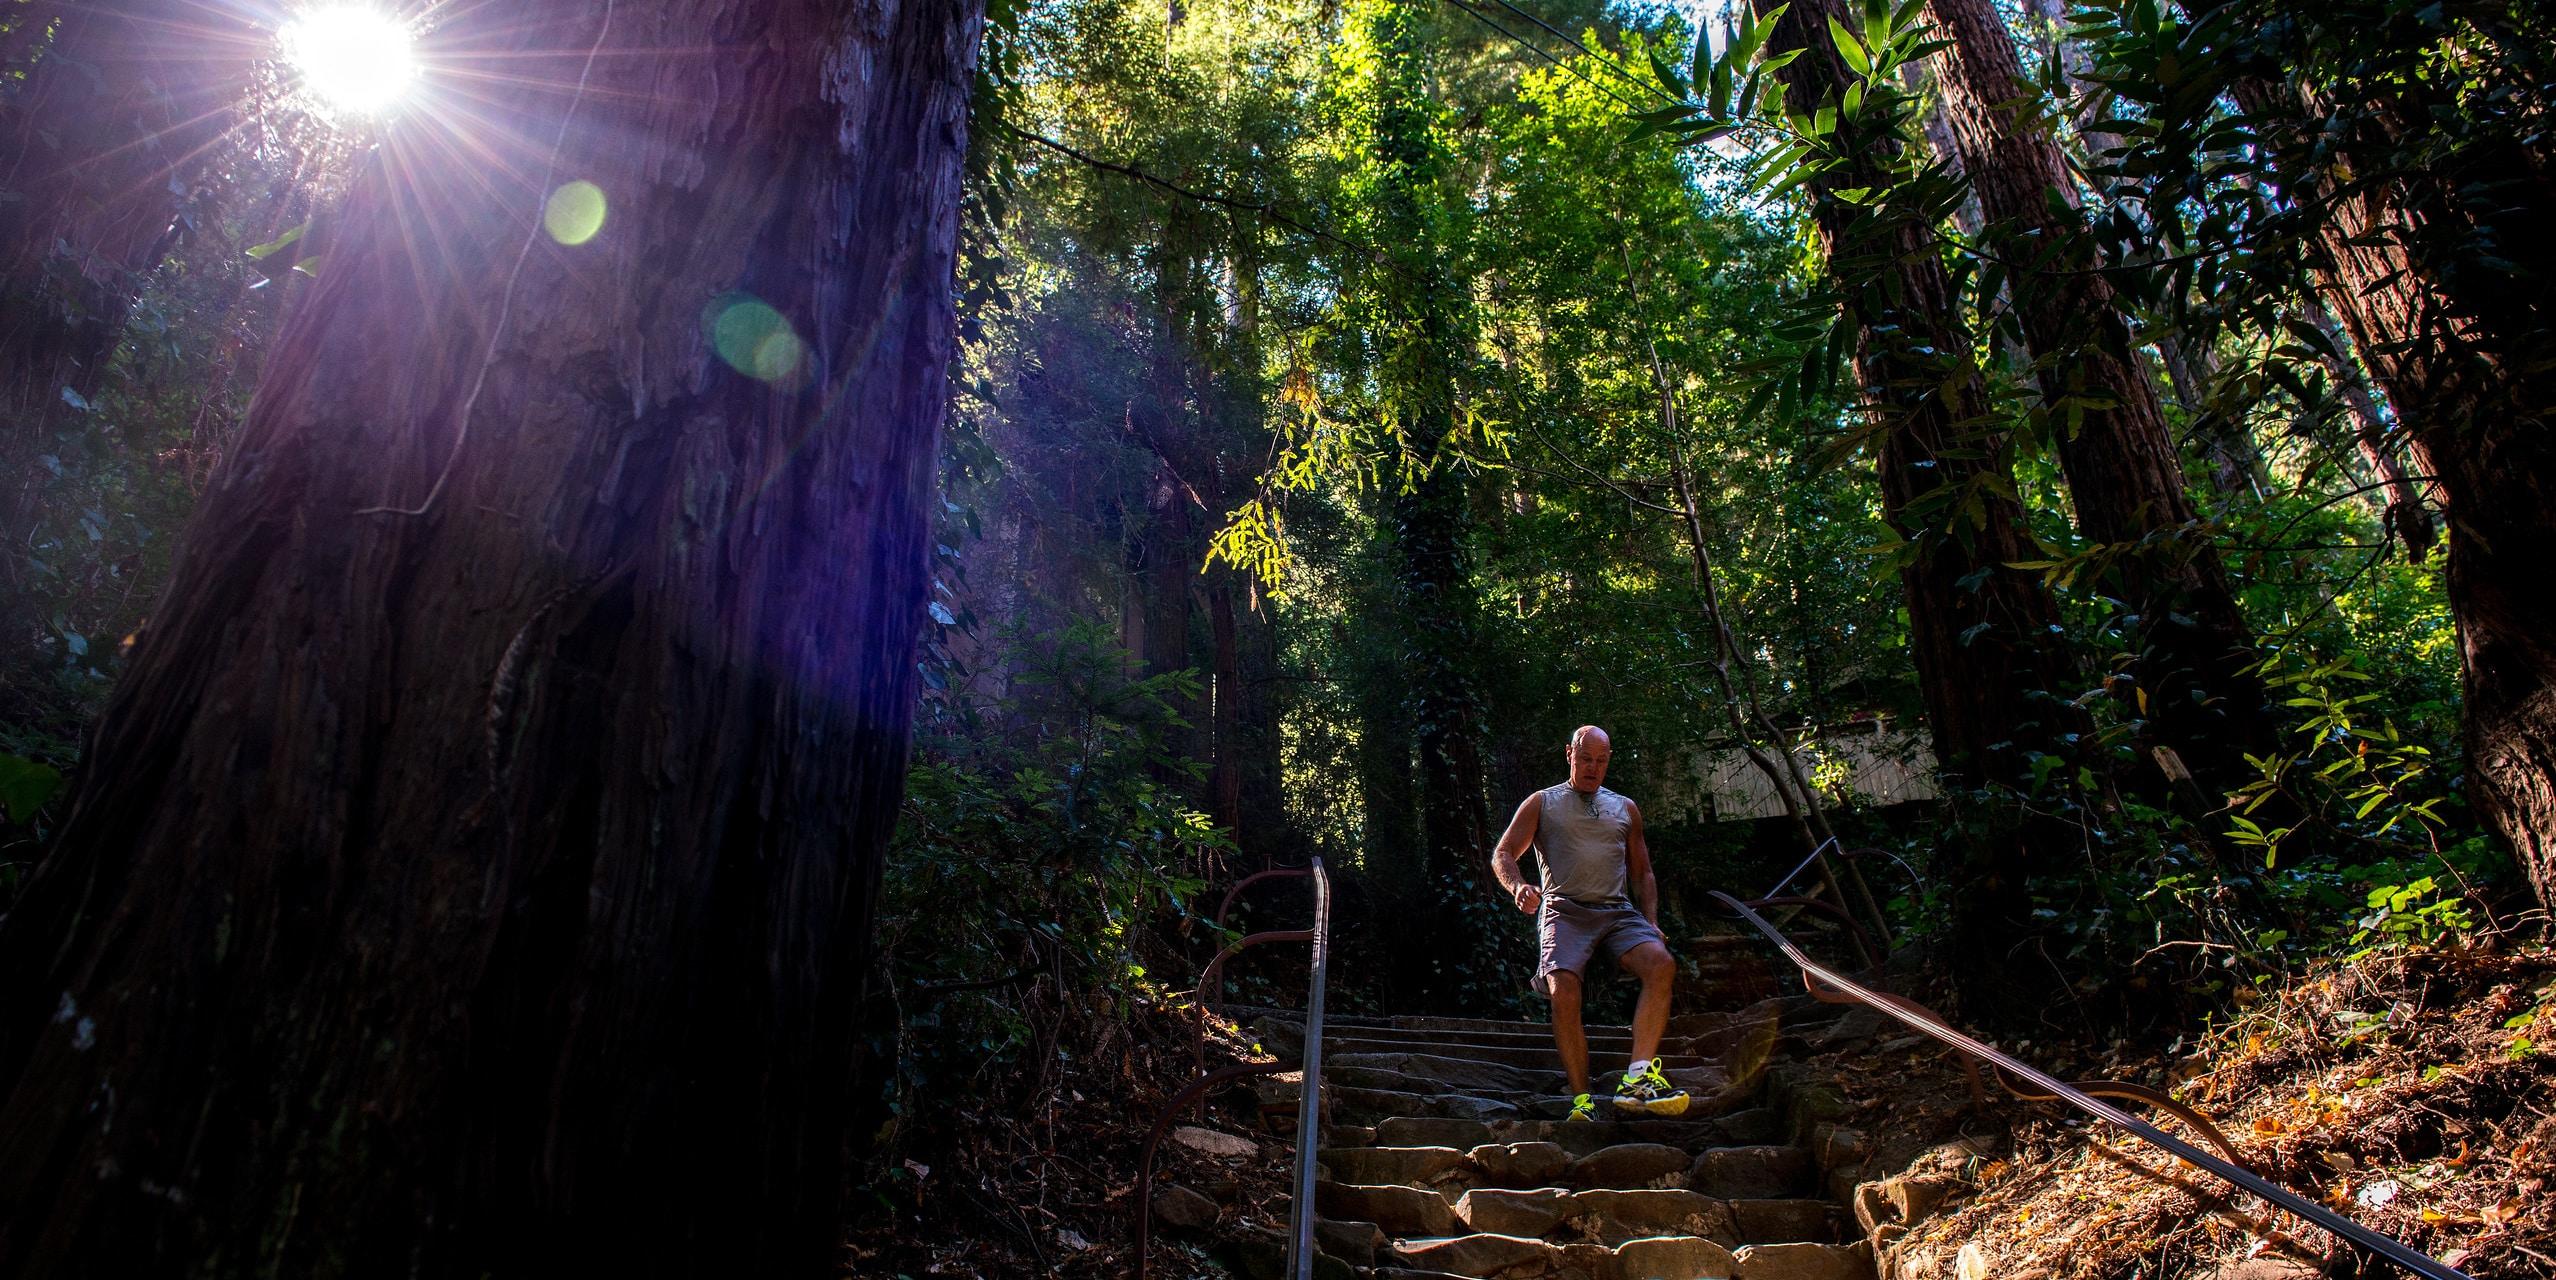 Runner takes on the challenge of the Dipsea Trail